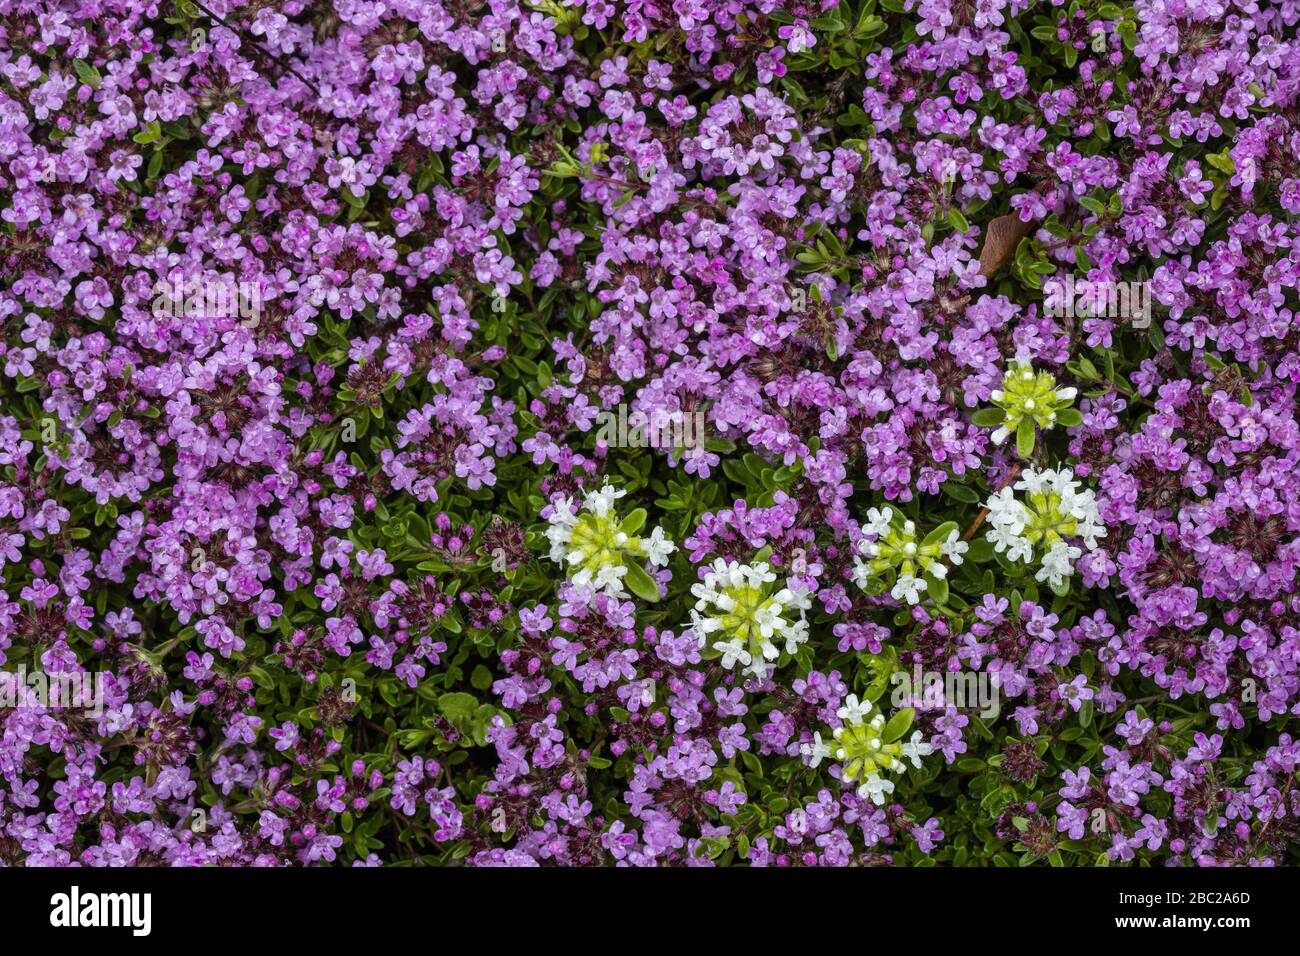 Creeping Thyme flowers as lawn replacement, photographed from above. Stock Photo